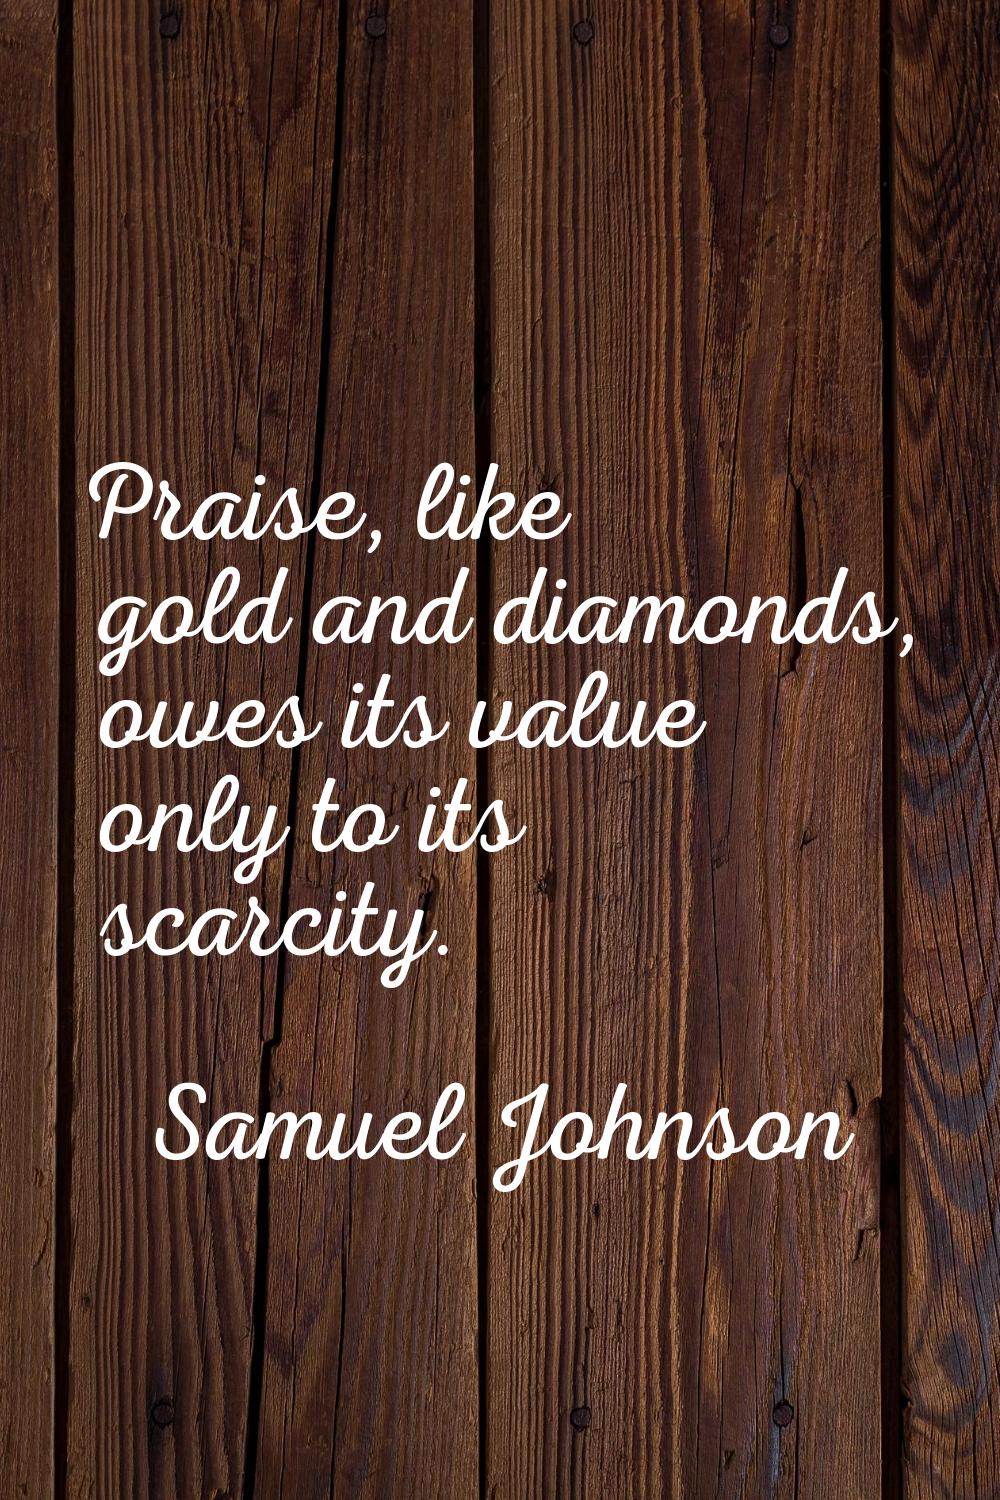 Praise, like gold and diamonds, owes its value only to its scarcity.